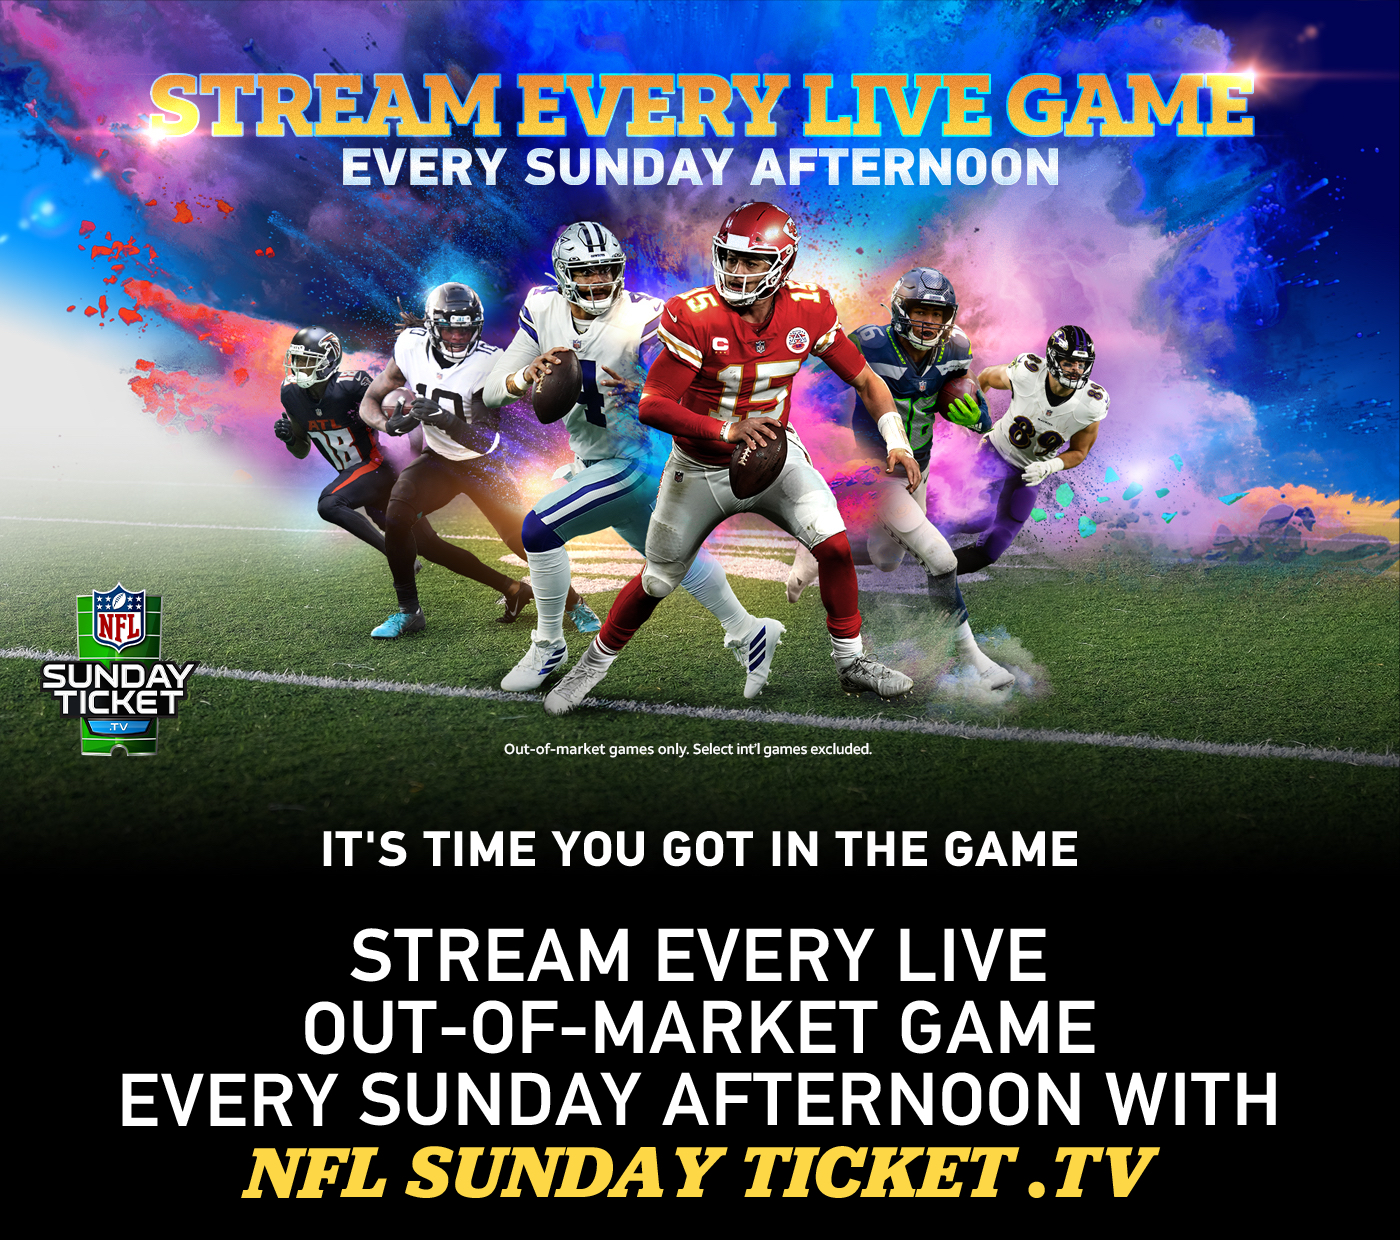 cheapest directv package with nfl sunday ticket